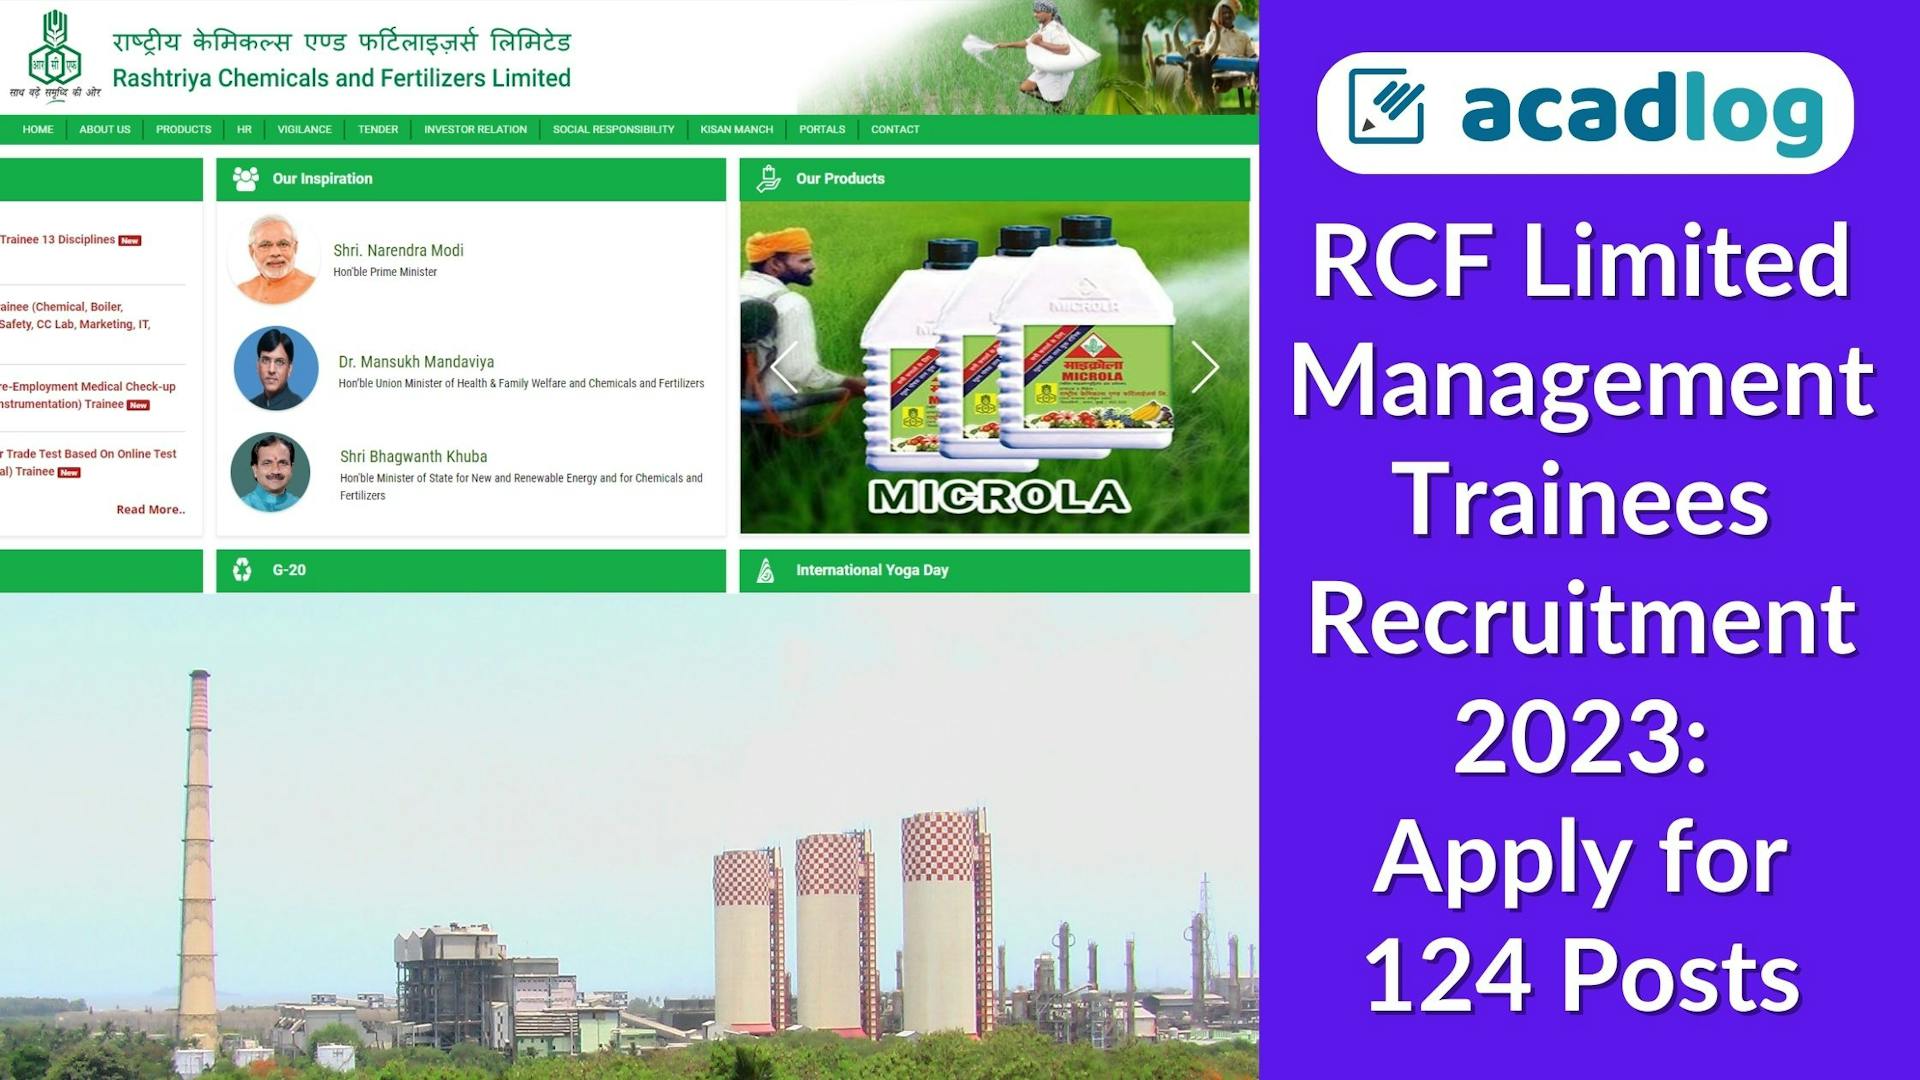 RCF Limited Management Trainee Recruitment 2023: Apply for 124 Posts